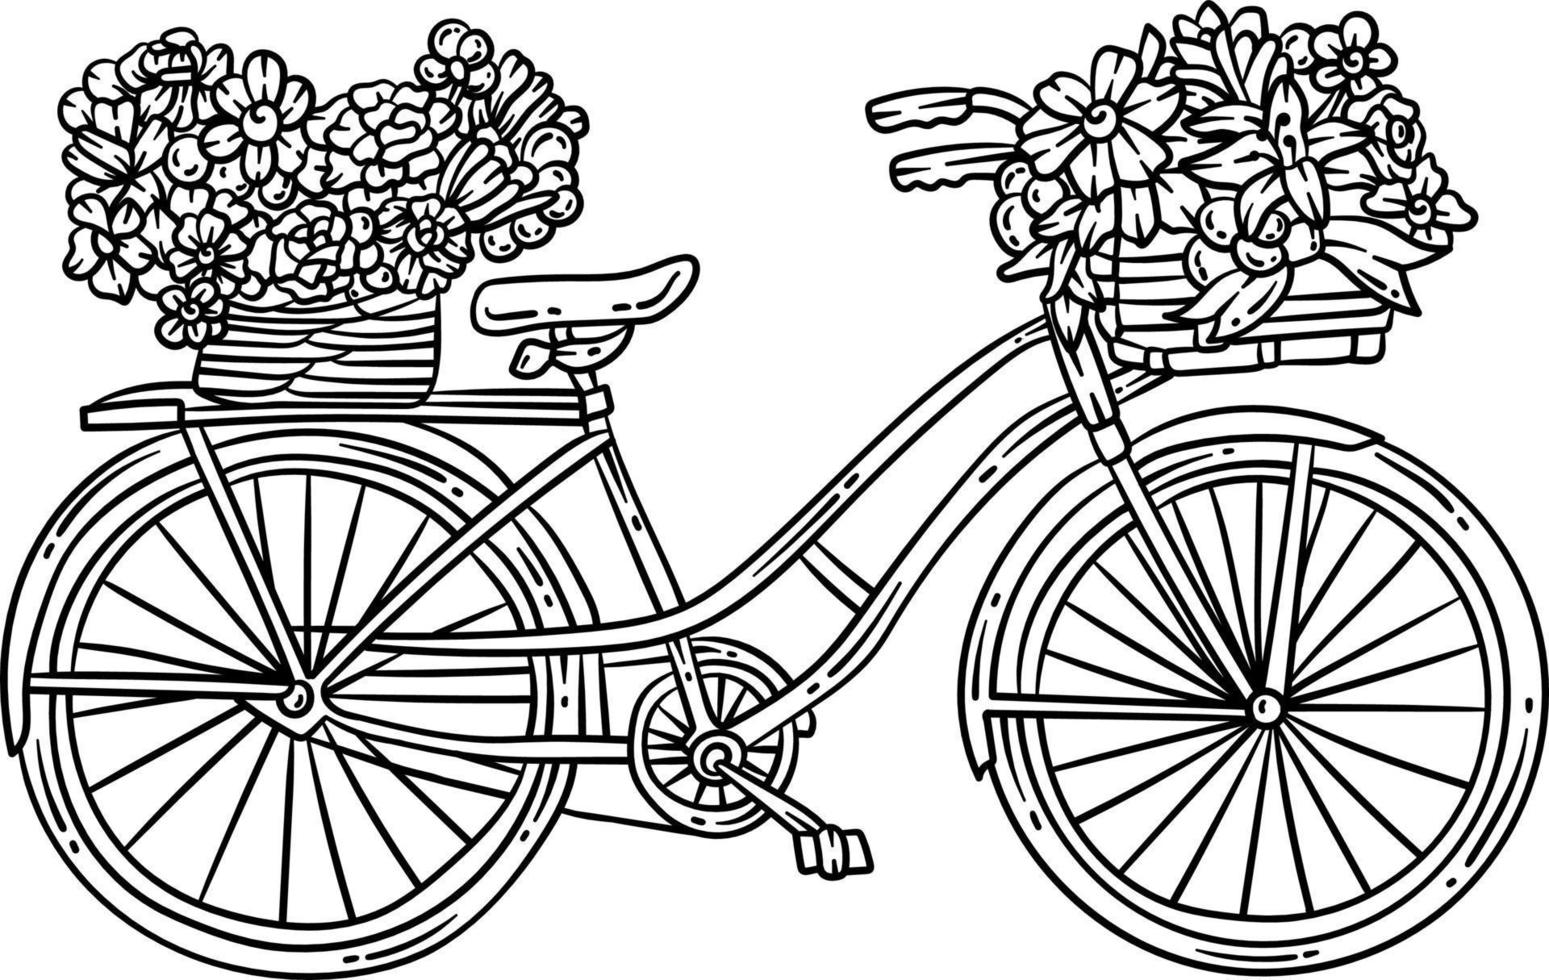 Bicycle Flowers Spring Coloring Page for Adults vector